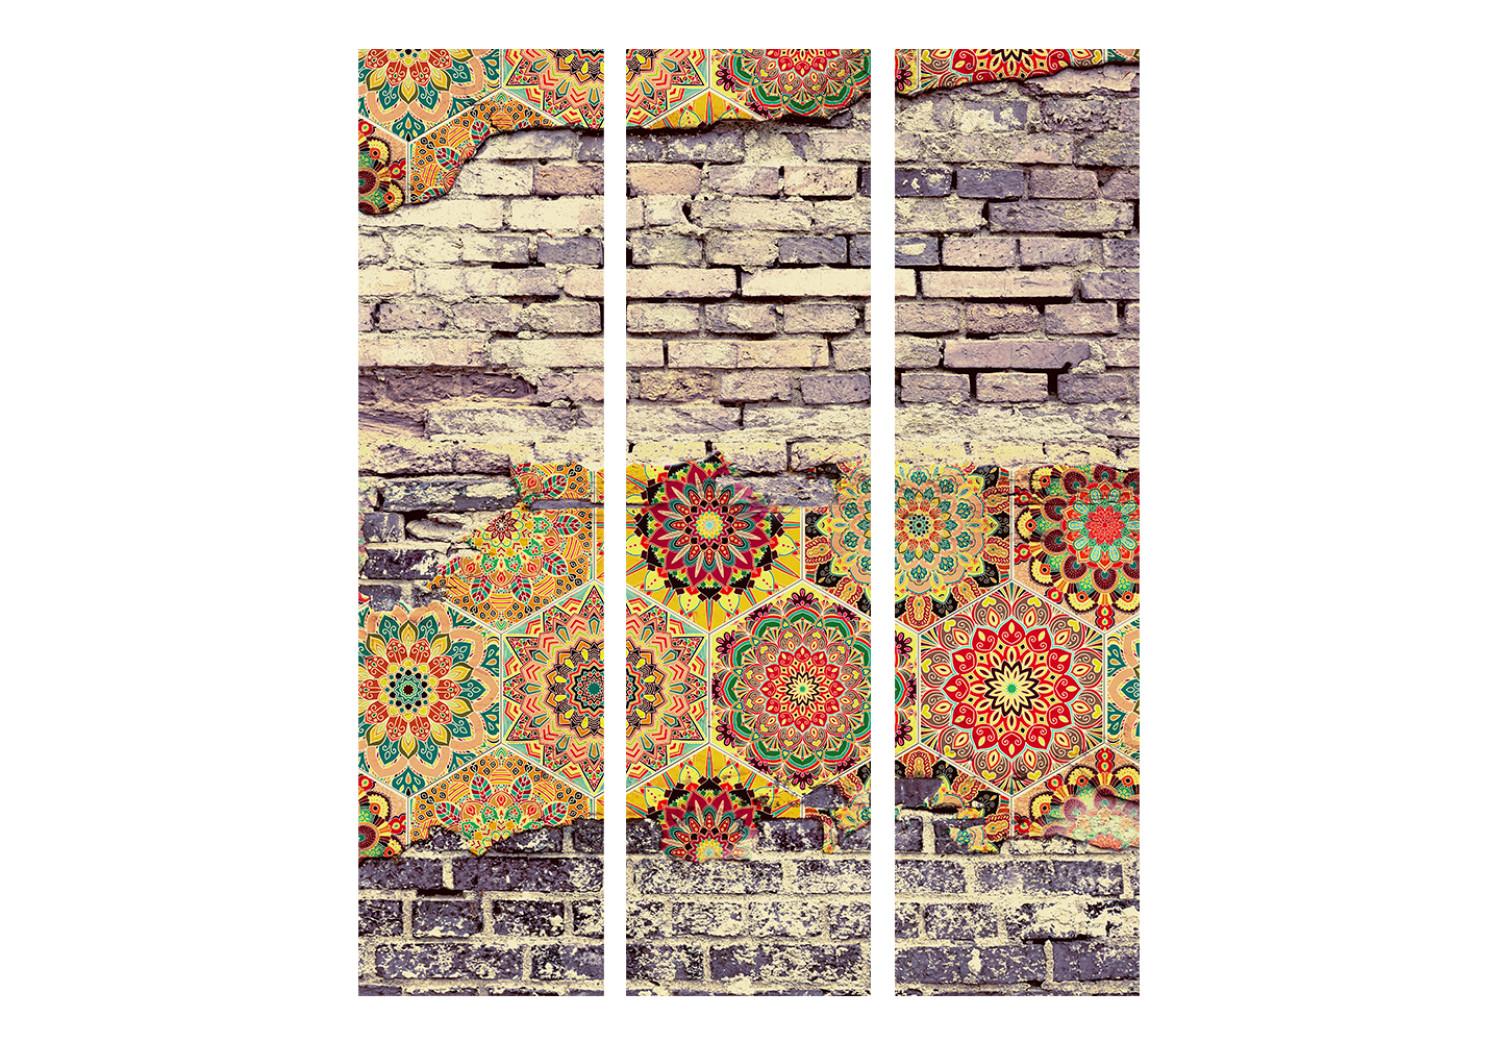 Room Divider Colorful Equation - texture of brick wall with colorful mandalas